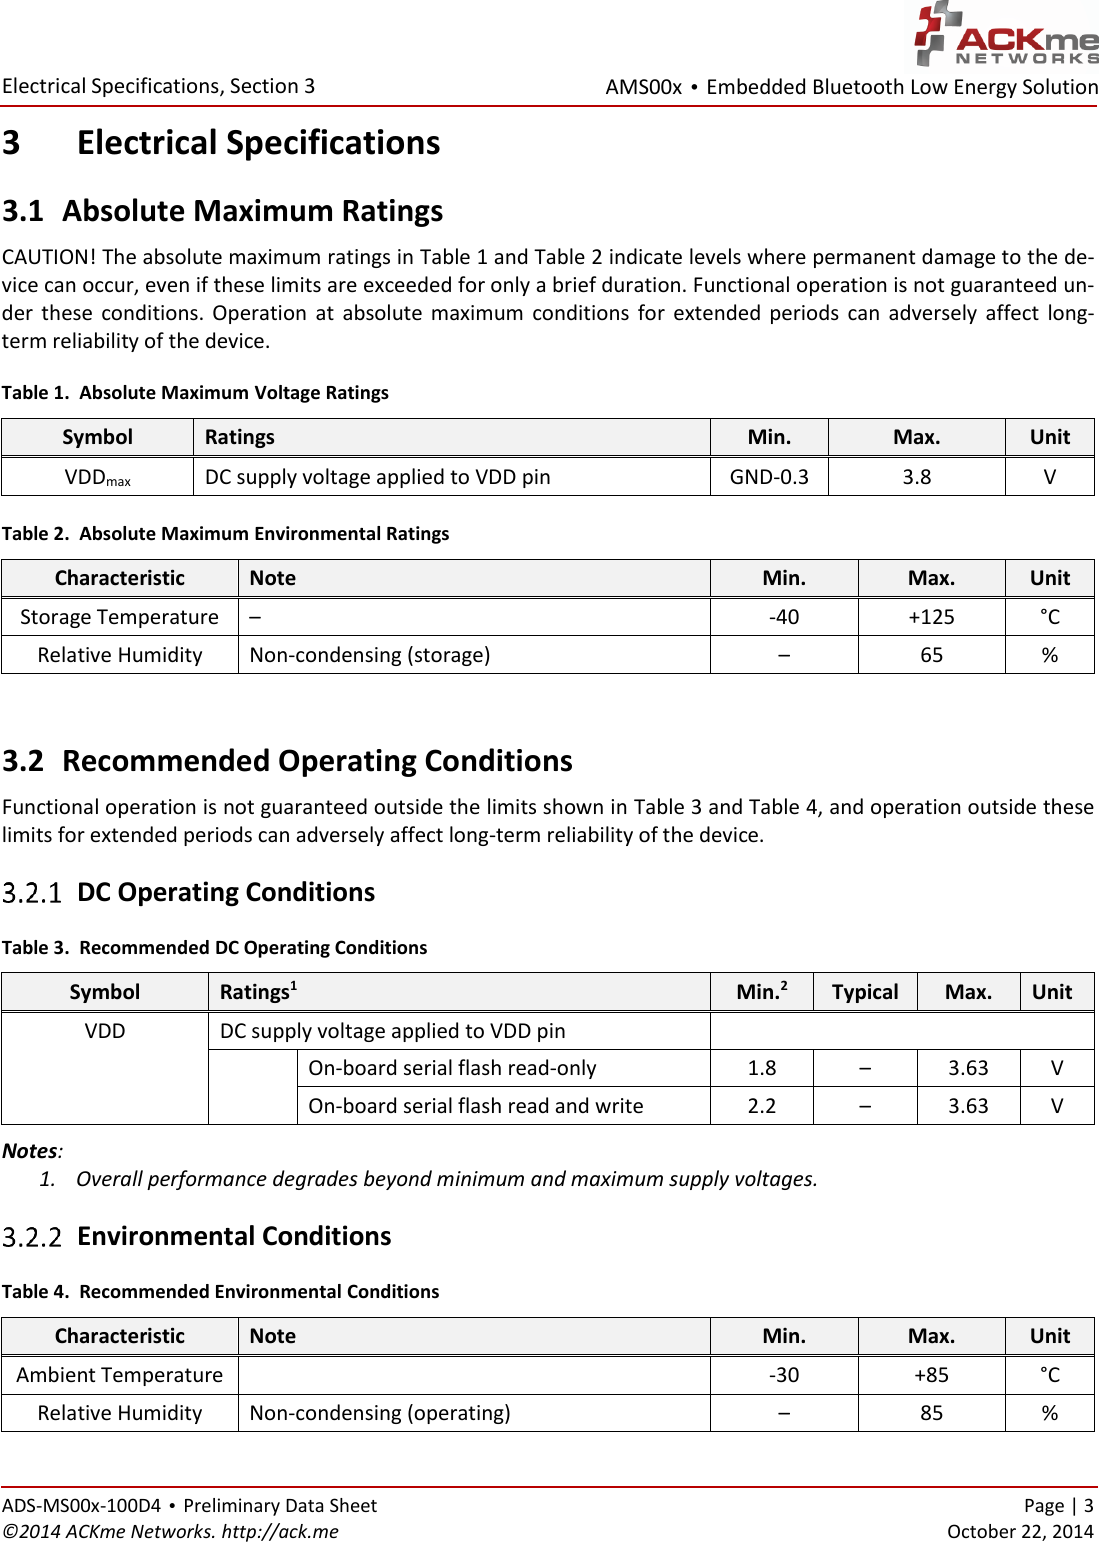 AMS00x • Embedded Bluetooth Low Energy Solution  Electrical Specifications, Section 3 ADS-MS00x-100D4 • Preliminary Data Sheet    Page | 3 ©2014 ACKme Networks. http://ack.me    October 22, 2014 3 Electrical Specifications 3.1 Absolute Maximum Ratings CAUTION! The absolute maximum ratings in Table 1 and Table 2 indicate levels where permanent damage to the de-vice can occur, even if these limits are exceeded for only a brief duration. Functional operation is not guaranteed un-der  these  conditions.  Operation  at  absolute  maximum  conditions  for  extended  periods  can  adversely  affect  long-term reliability of the device. Table 1.  Absolute Maximum Voltage Ratings Symbol Ratings Min. Max. Unit VDDmax DC supply voltage applied to VDD pin GND-0.3 3.8 V Table 2.  Absolute Maximum Environmental Ratings Characteristic Note Min. Max. Unit Storage Temperature –  -40 +125 °C Relative Humidity Non-condensing (storage) – 65 %  3.2 Recommended Operating Conditions Functional operation is not guaranteed outside the limits shown in Table 3 and Table 4, and operation outside these limits for extended periods can adversely affect long-term reliability of the device.  DC Operating Conditions Table 3.  Recommended DC Operating Conditions Symbol Ratings1 Min.2 Typical Max. Unit VDD DC supply voltage applied to VDD pin   On-board serial flash read-only 1.8 – 3.63 V On-board serial flash read and write 2.2 – 3.63 V Notes:  1. Overall performance degrades beyond minimum and maximum supply voltages.  Environmental Conditions Table 4.  Recommended Environmental Conditions Characteristic Note Min. Max. Unit Ambient Temperature  -30 +85 °C Relative Humidity Non-condensing (operating) – 85 %  